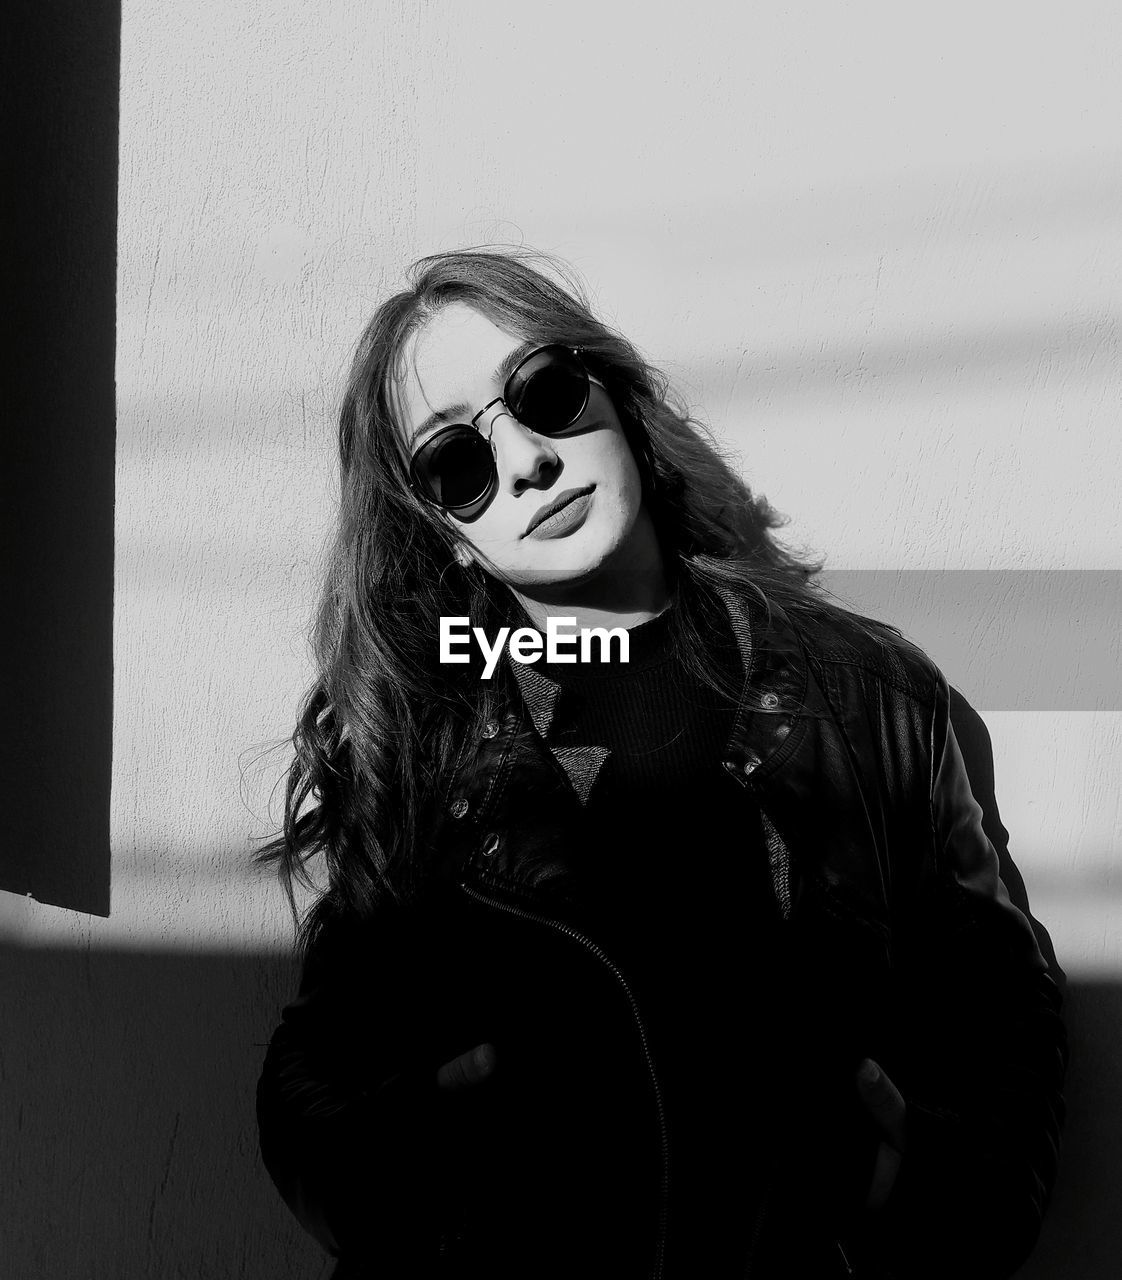 Portrait of young woman wearing sunglasses and jacket against wall